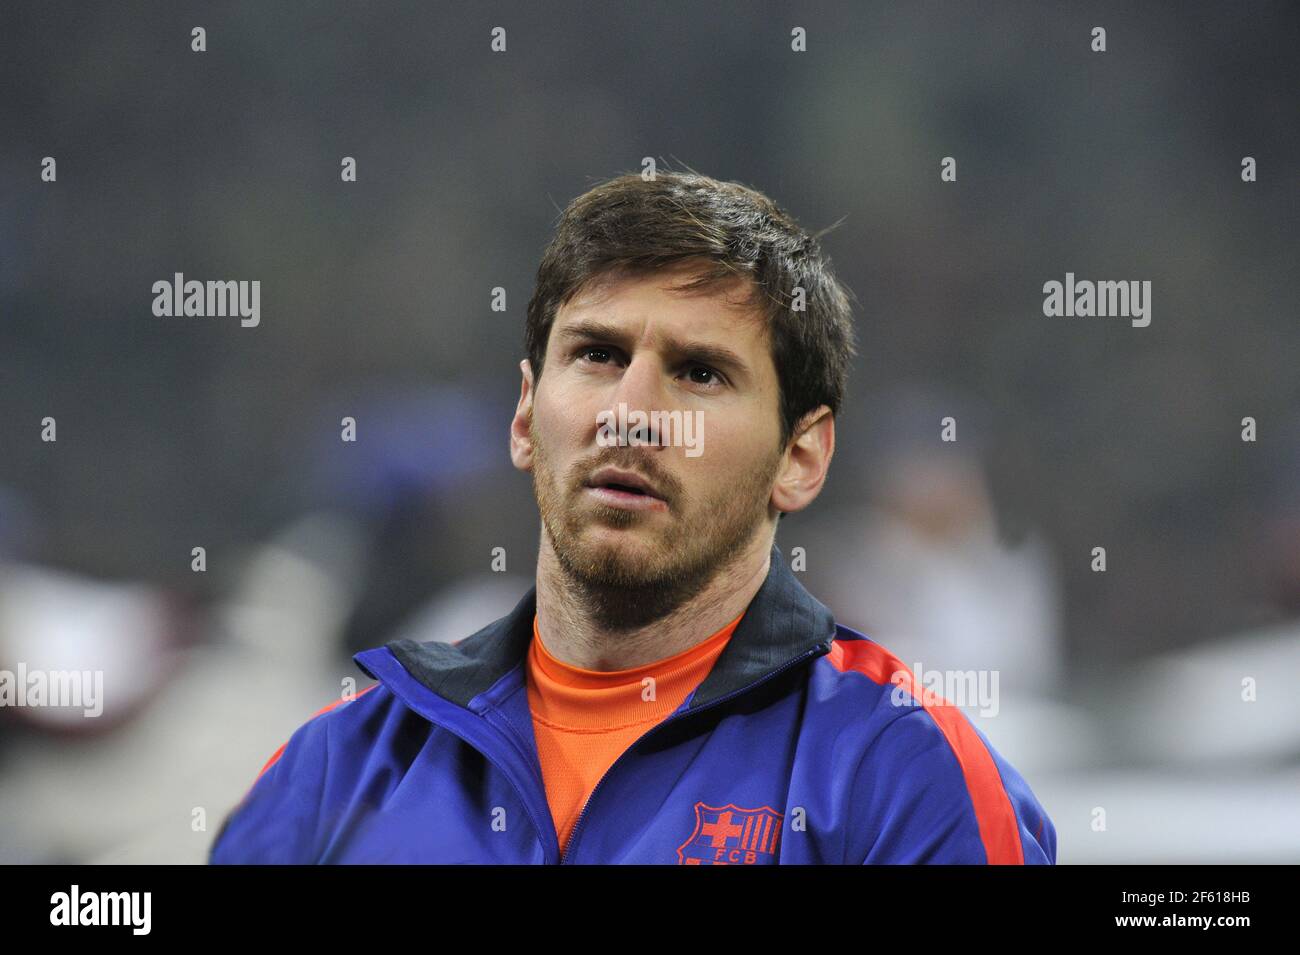 Barcelona football player Lionel Messi portrait at the San Siro soccer  stadium during the UEFA Champions League match AC Milan vs FC Barcelona, in  Milan Stock Photo - Alamy